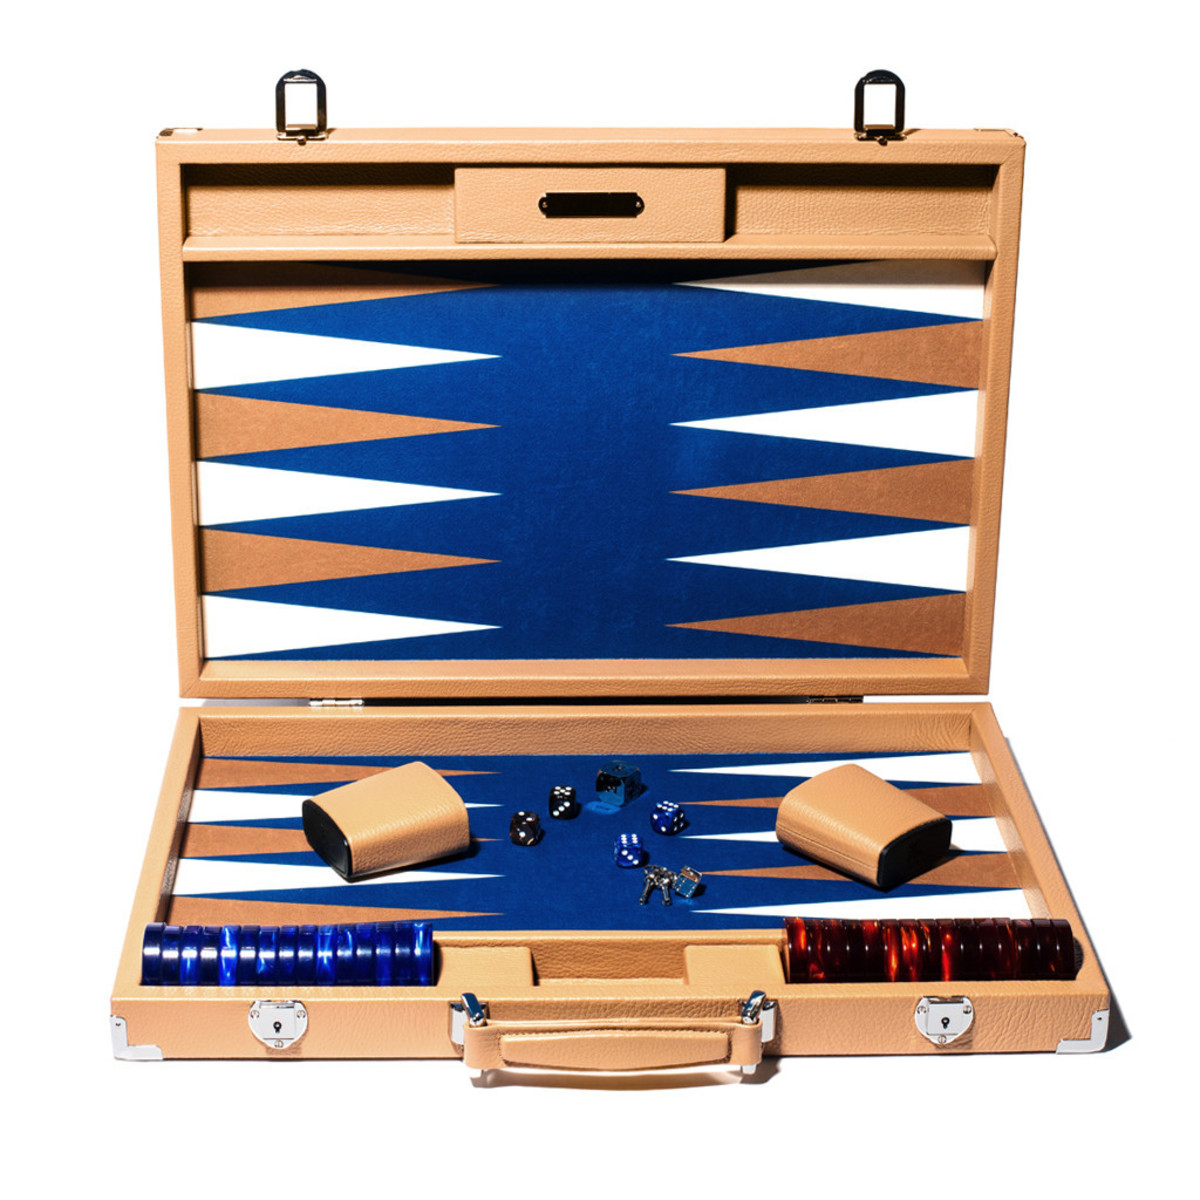 man-of-the-world-hector-saxe-competition-backgammon-board-cognac-leather-2-alt4_grande_940dcf9b-42be-480f-af26-49915dc0d92c_1024x1024